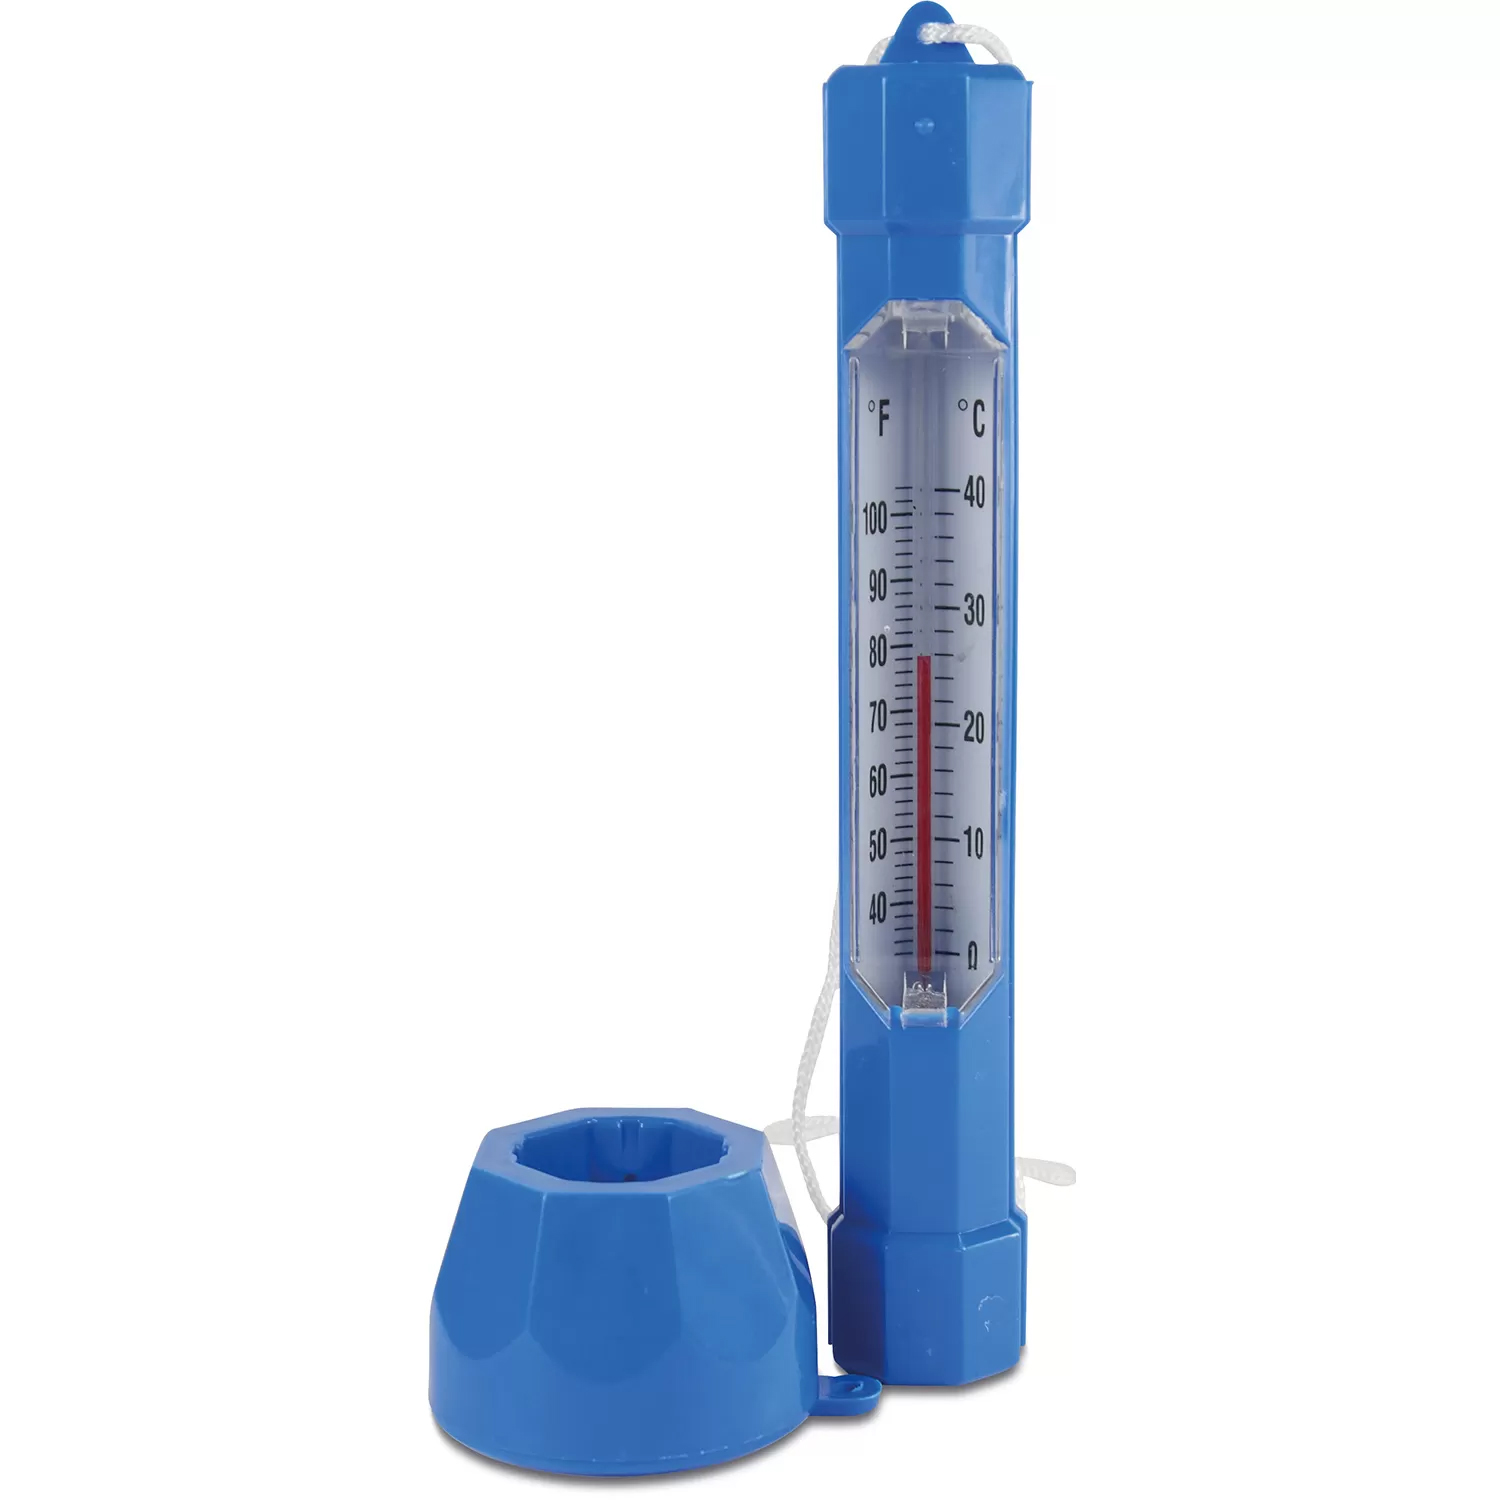 Floating thermometers